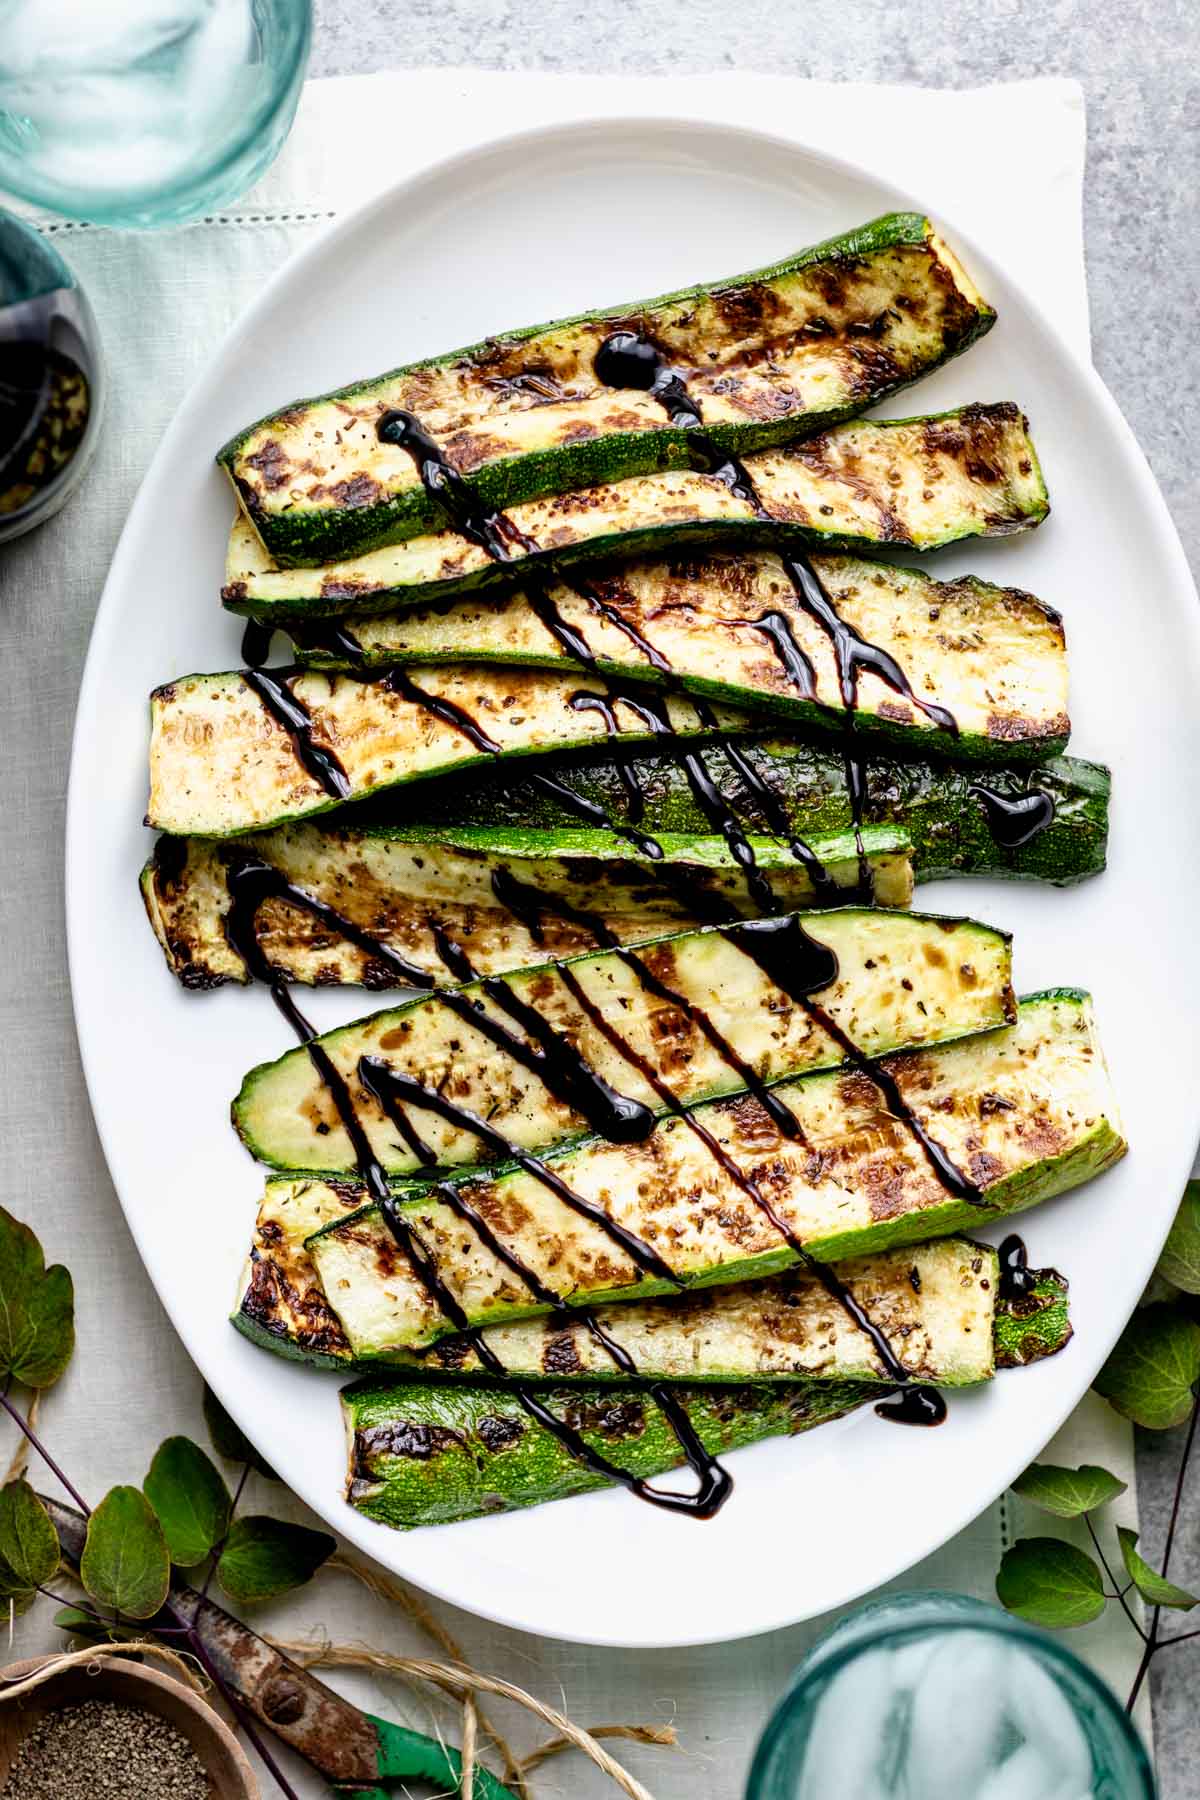 Grilled zucchini from overhead with green scissors, twine and clippings from the garden